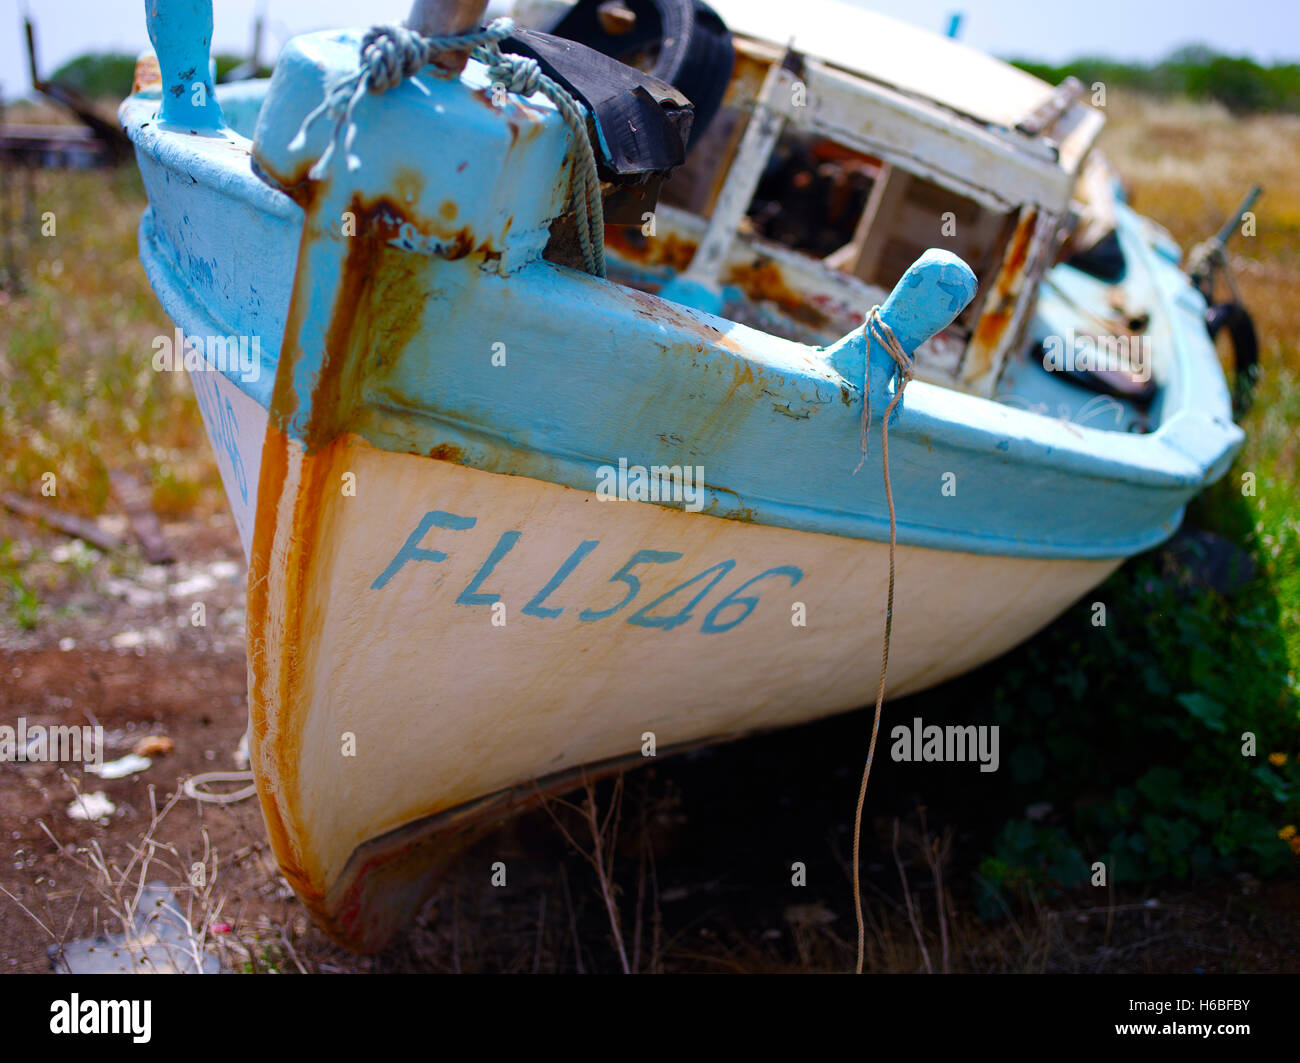 An old fishing boat with a cabin Stock Photo by SkyNextphoto